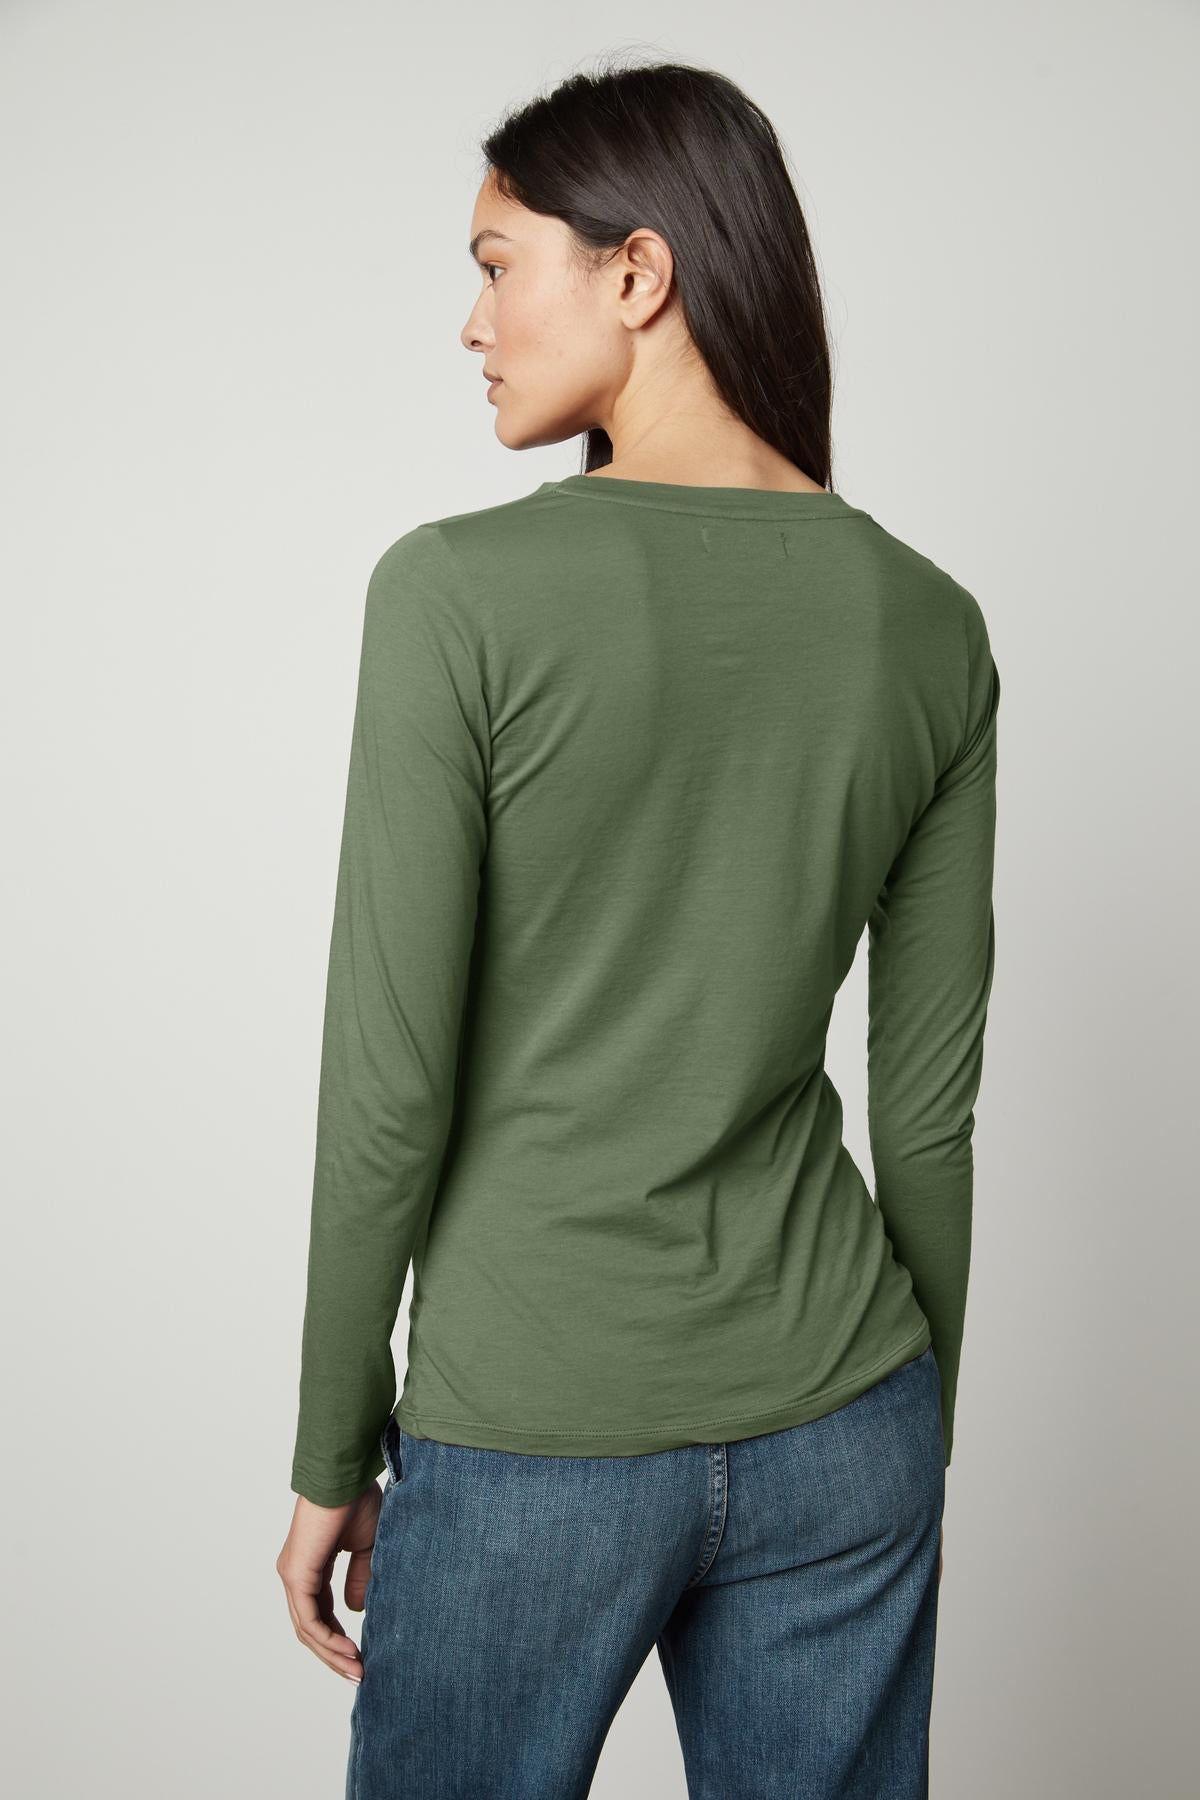 The back view of a person wearing a Velvet by Graham & Spencer ZOFINA GAUZY WHISPER FITTED CREW NECK TEE.-35783262568641